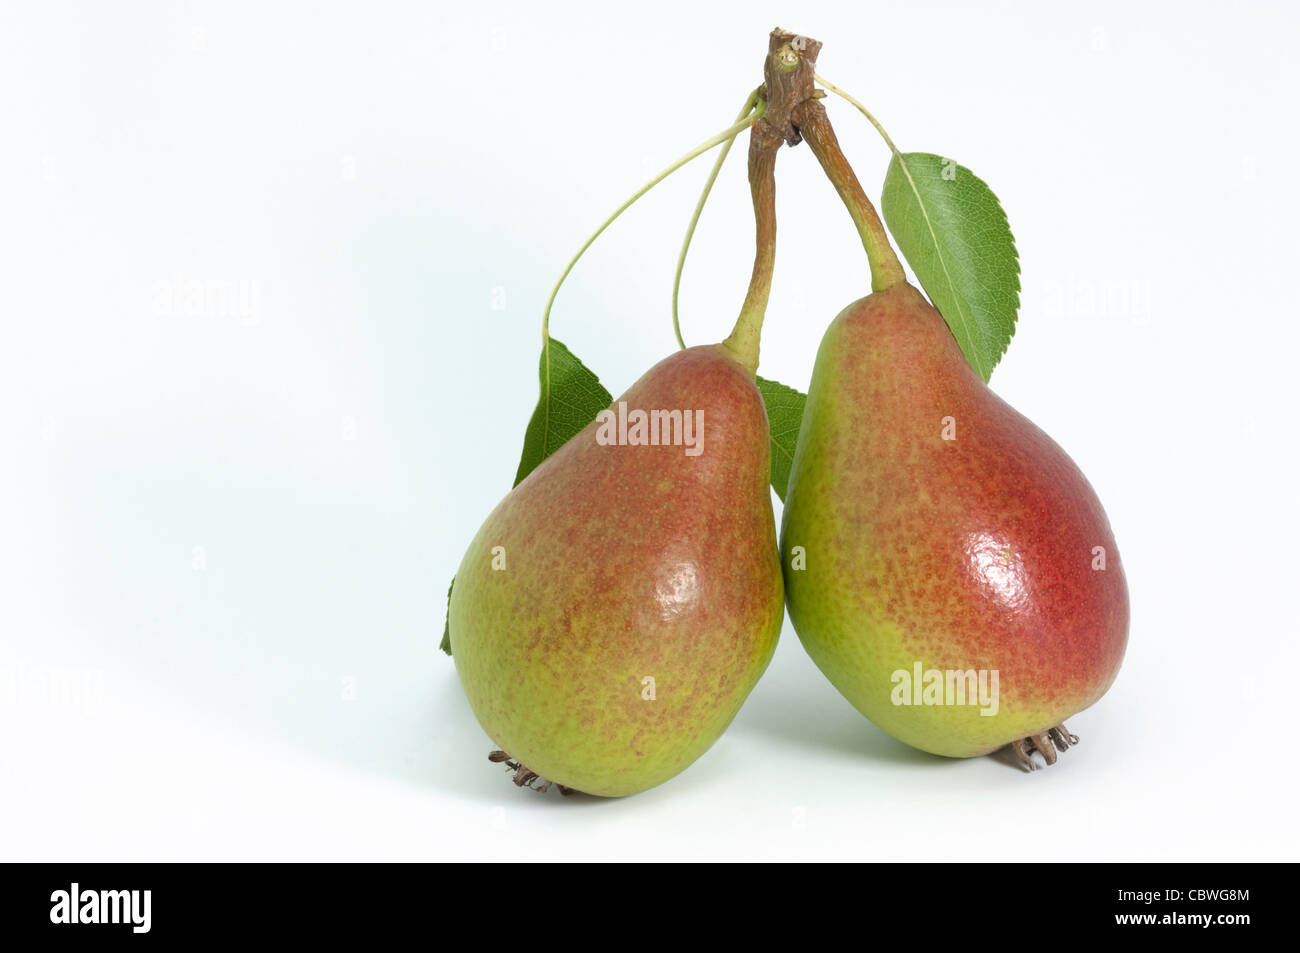 Common Pear, European Pear (Pyrus communis), variety: Gute Luise, fruit with leaves, studio picture. Stock Photo